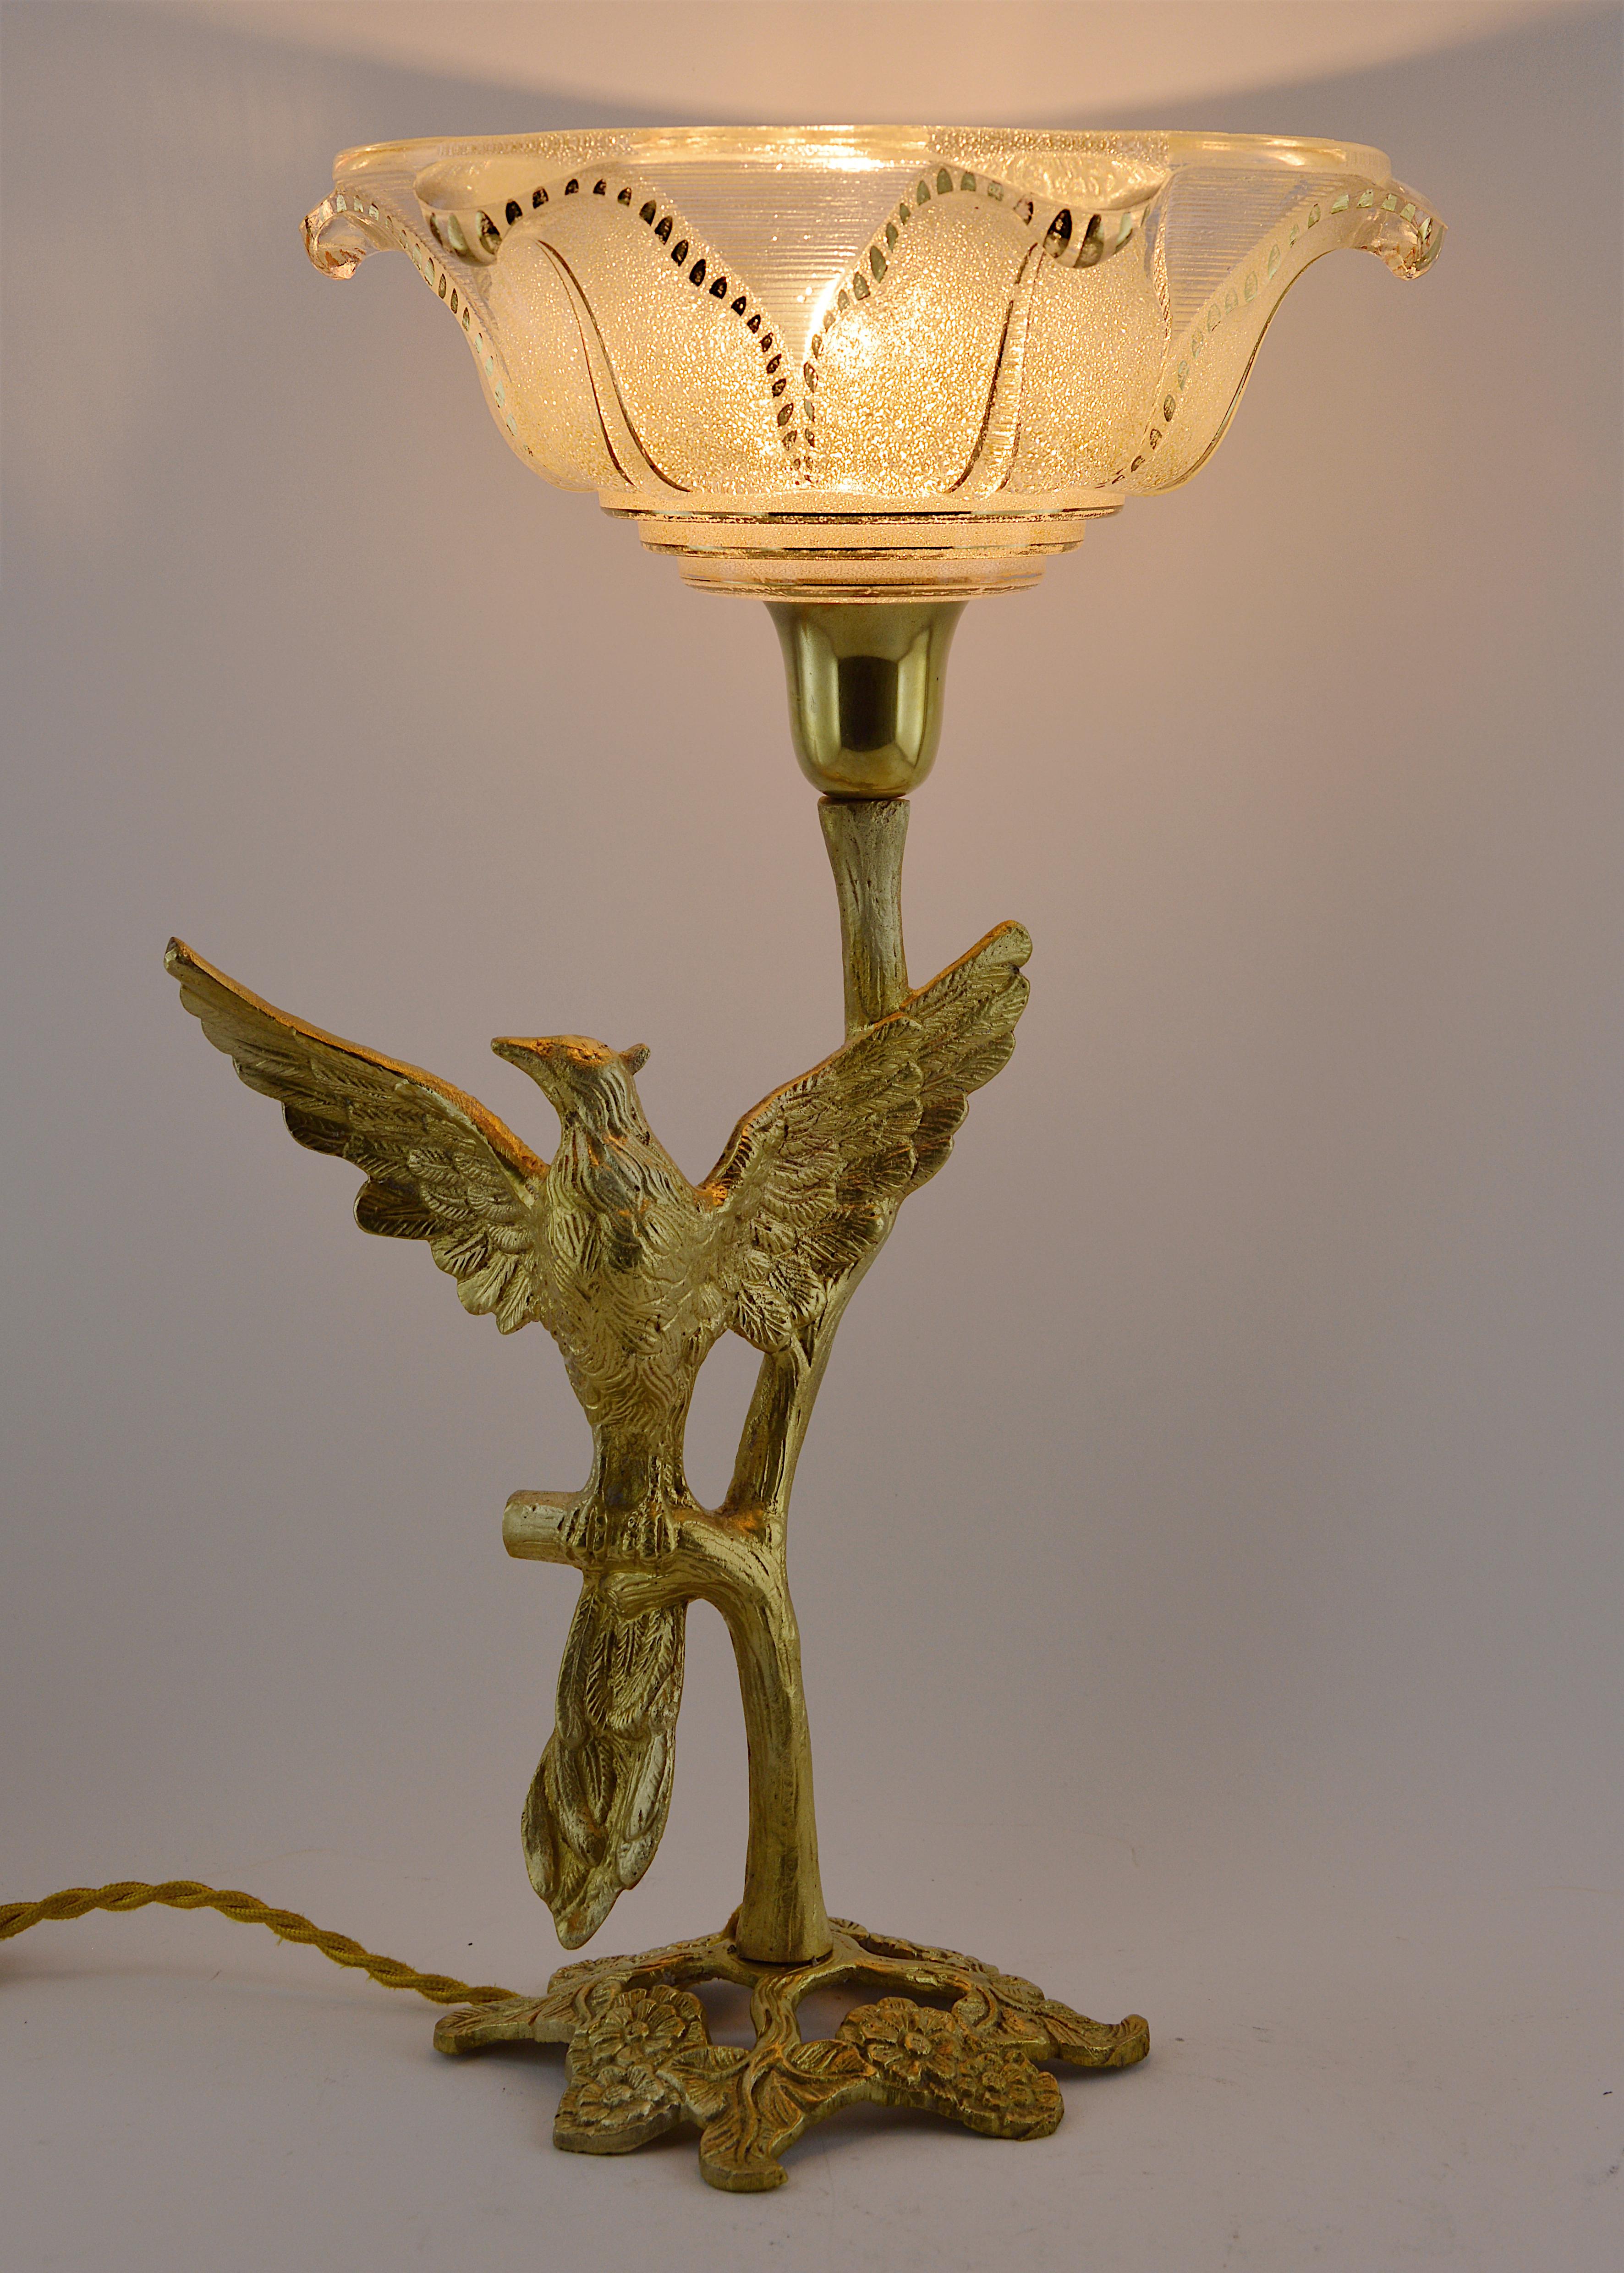 French Art Deco bird table lamp, late 1930s. Bronze paradise bird on a tree. Superb gilt frosted molded glass shade. Measures: Height 15